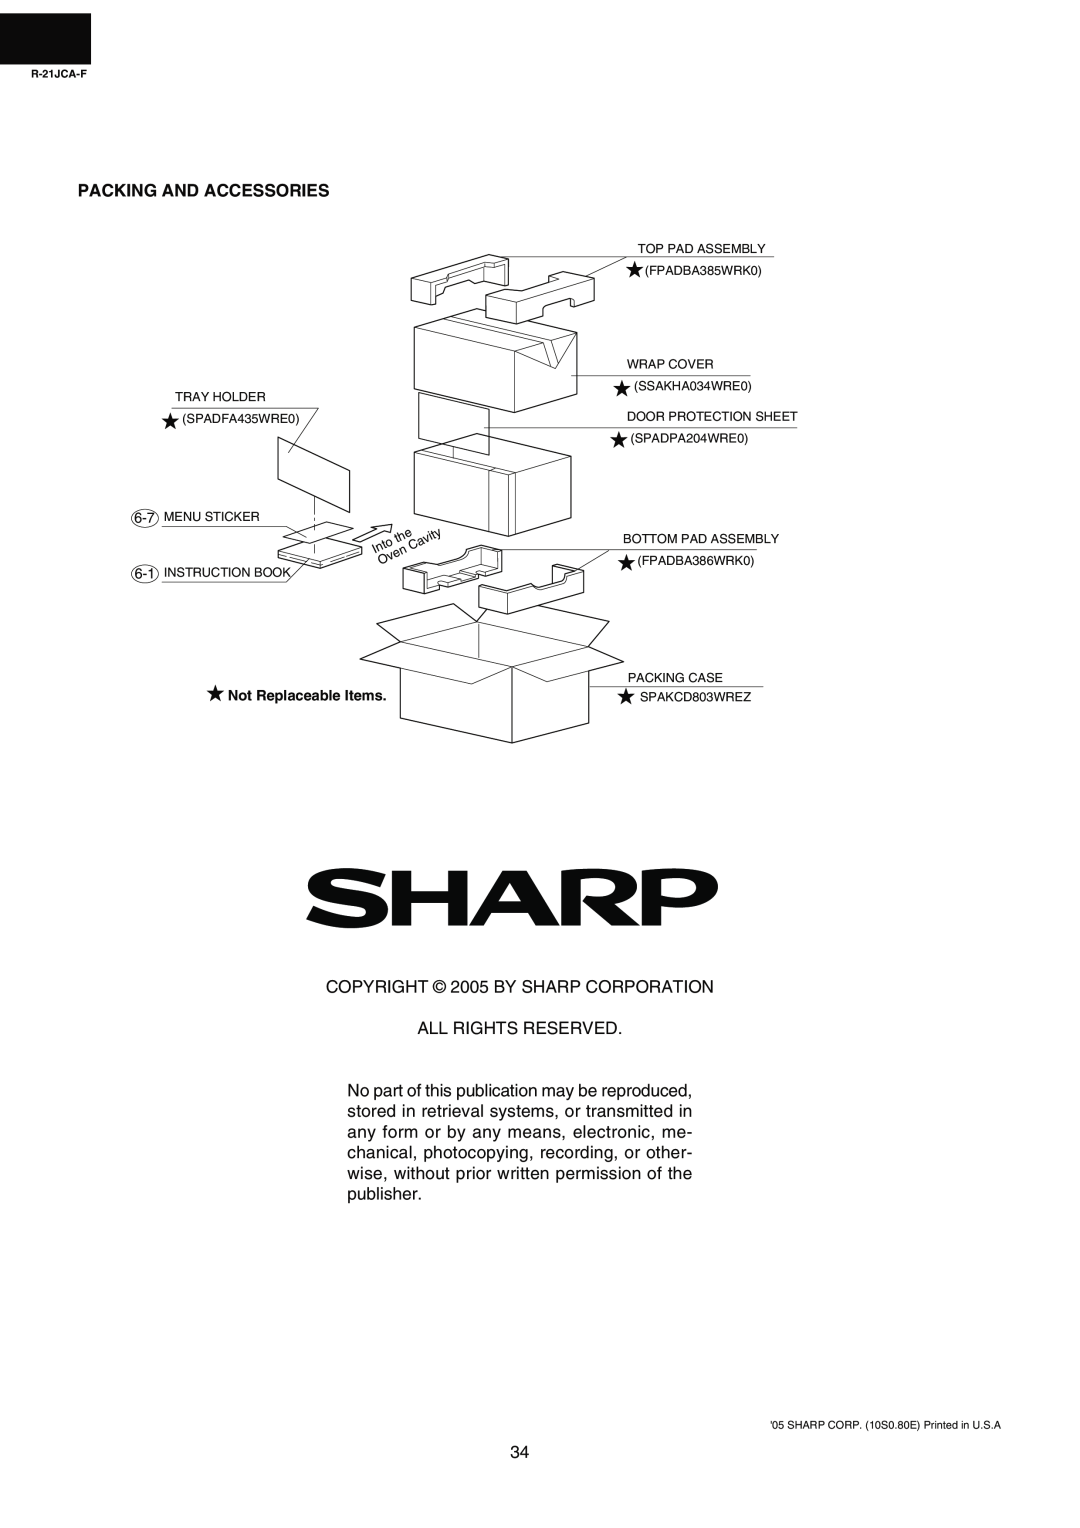 Sharp R-21JCA-F service manual Packing And Accessories 